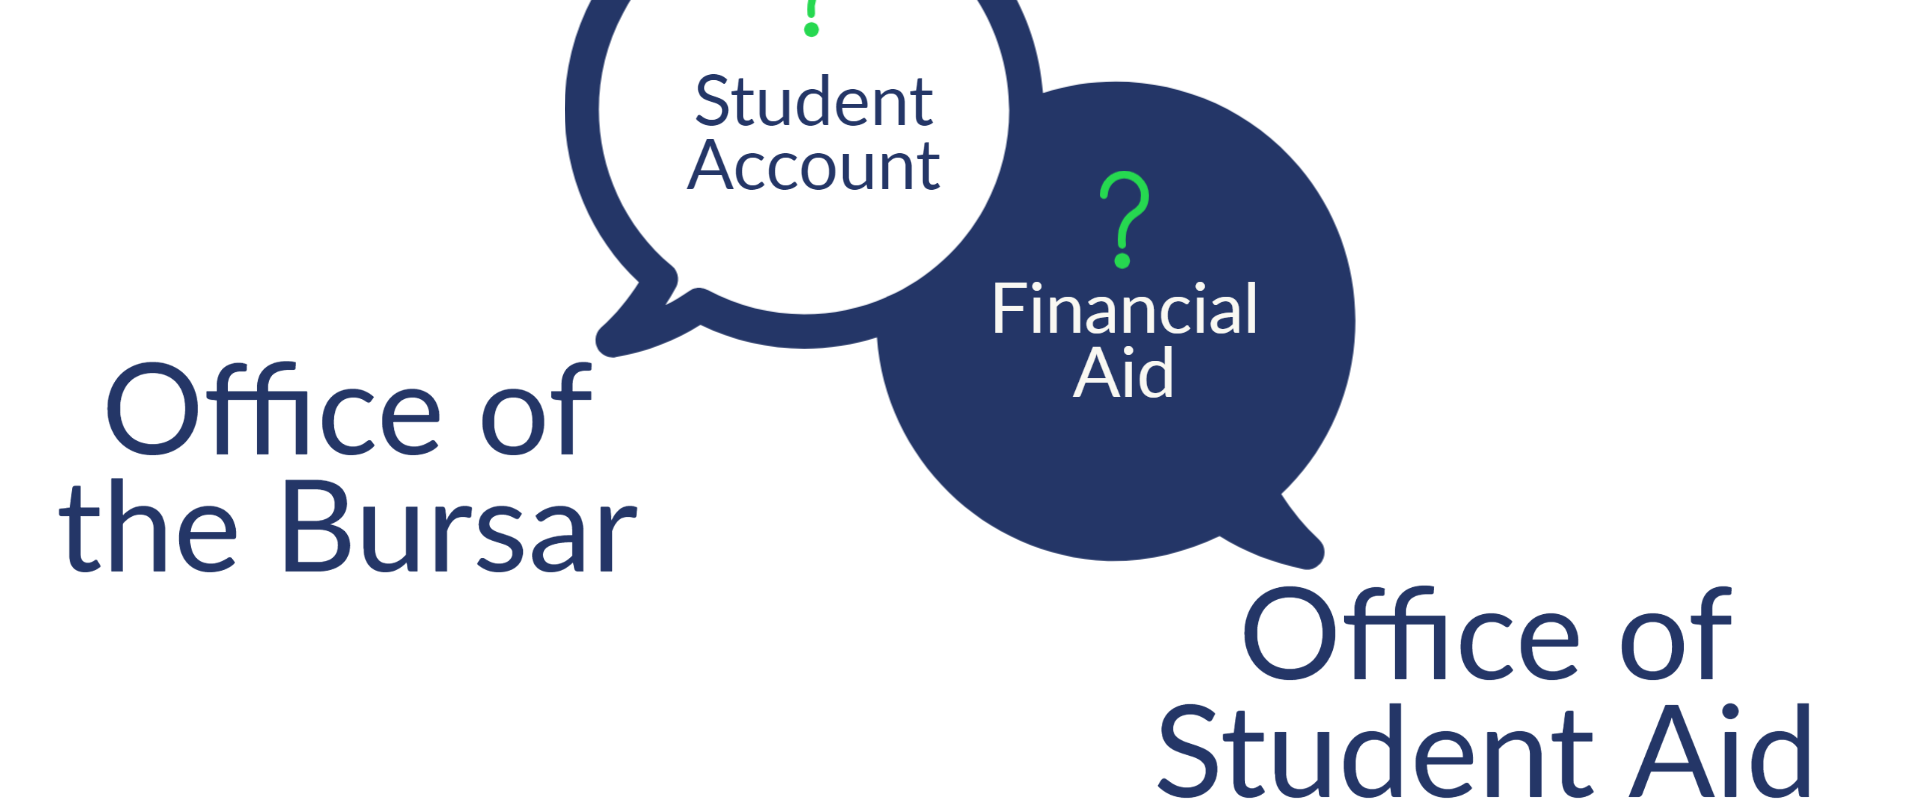 Student Account questions Office of the Bursar Financial Aid Office of Student Aid and question marks